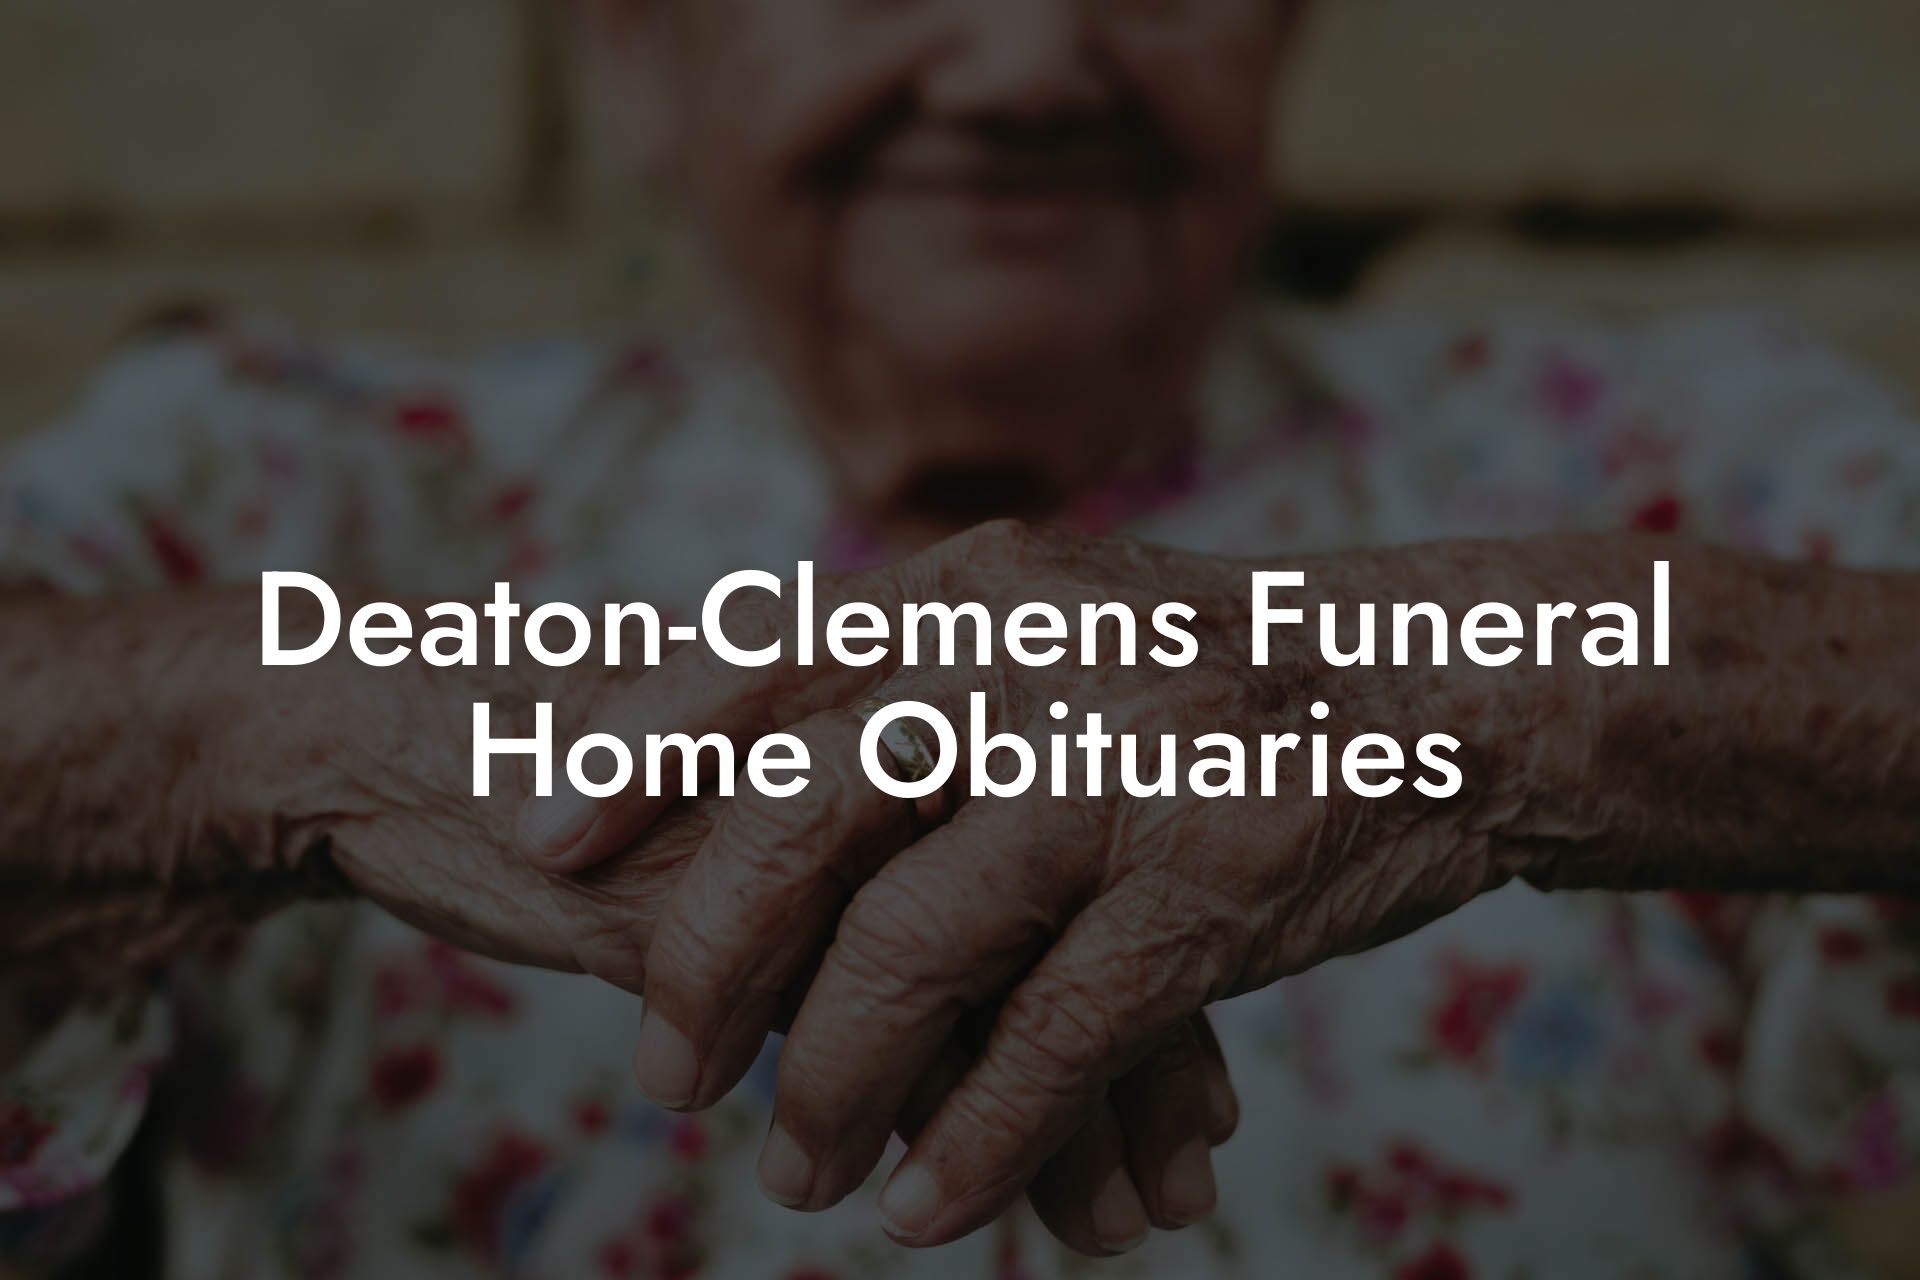 Deaton-Clemens Funeral Home Obituaries